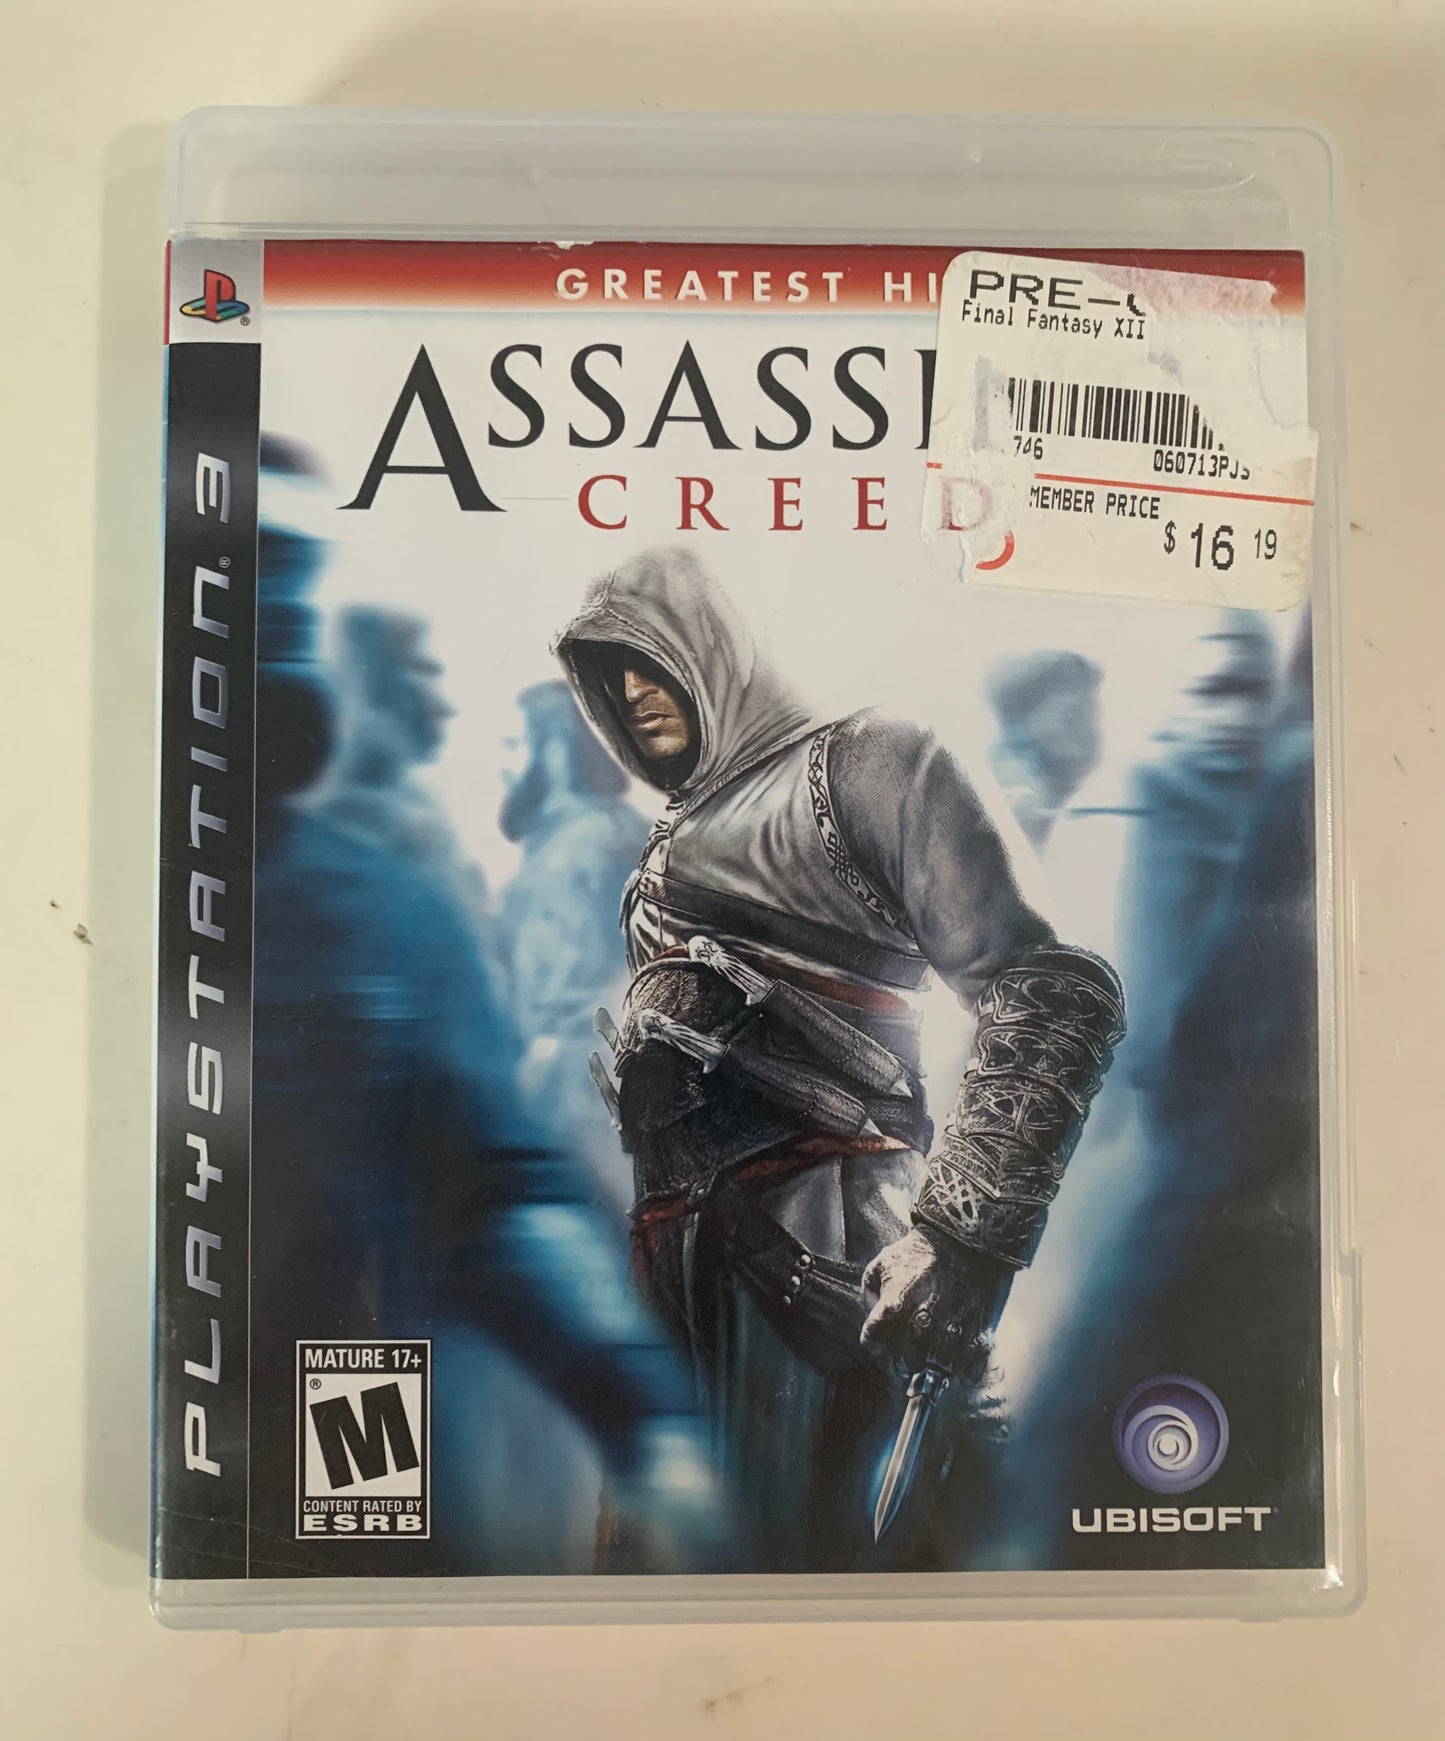 Assassin’s Creed PlayStation 3 PS3 Game 34339-108